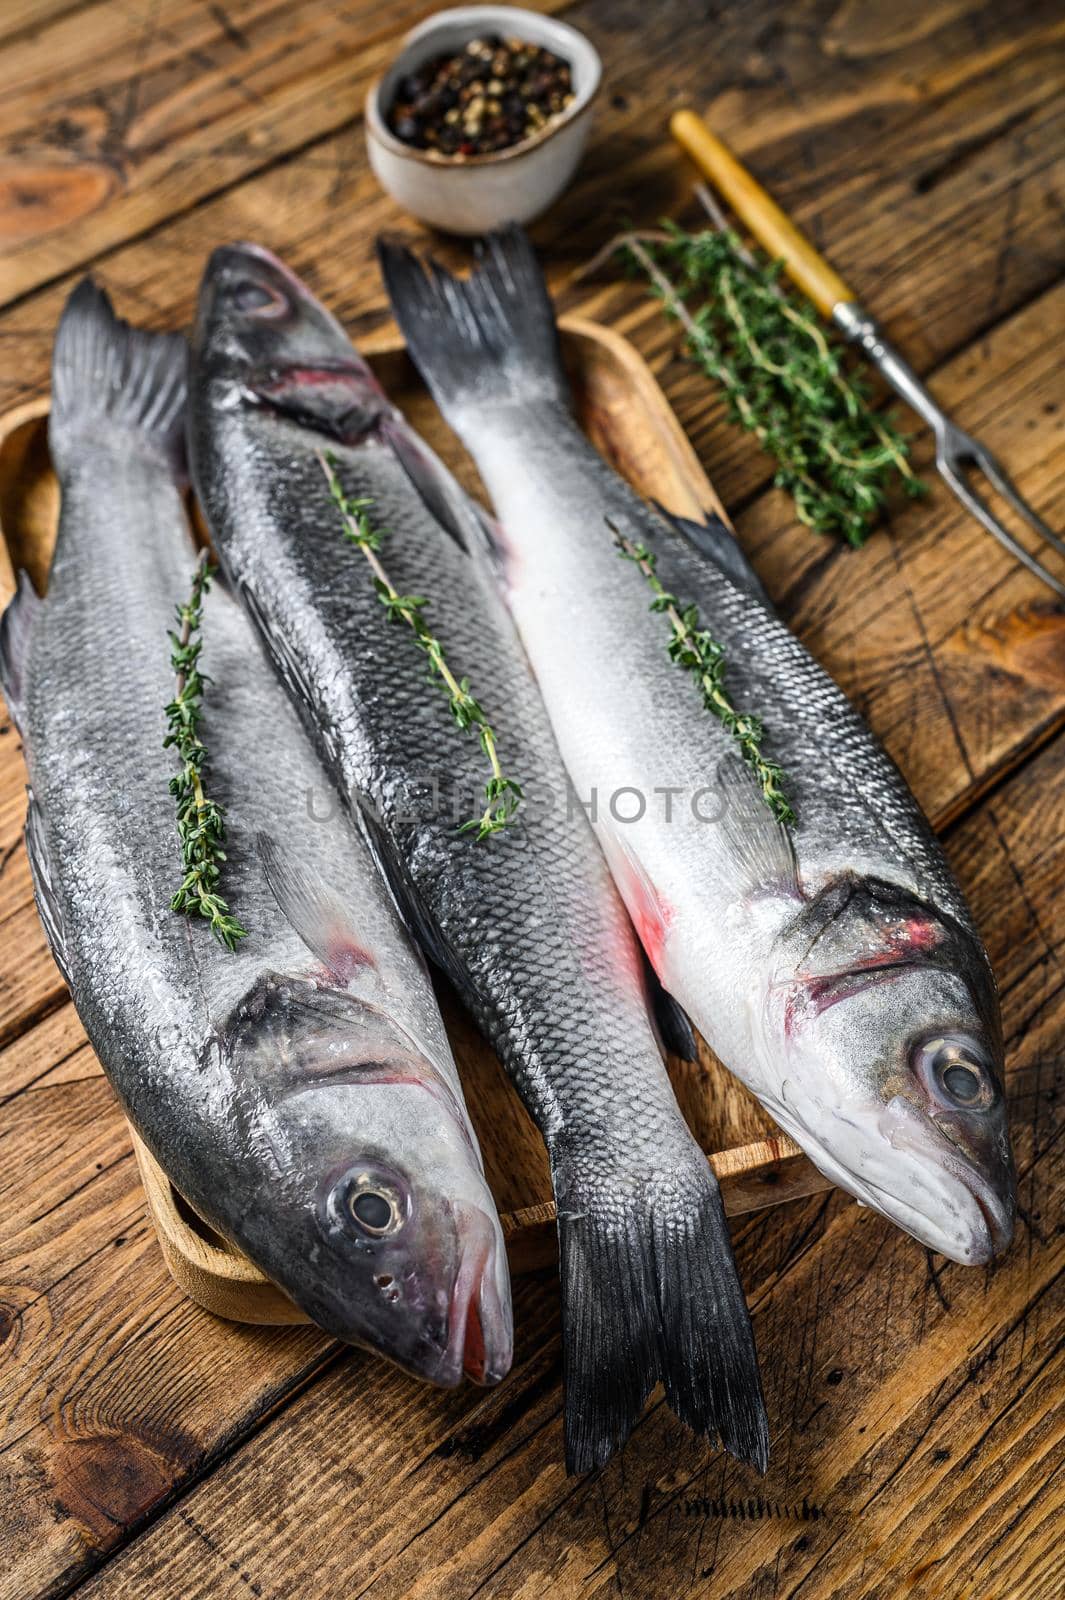 Raw seabass fish on a tray. wooden background. Top view.